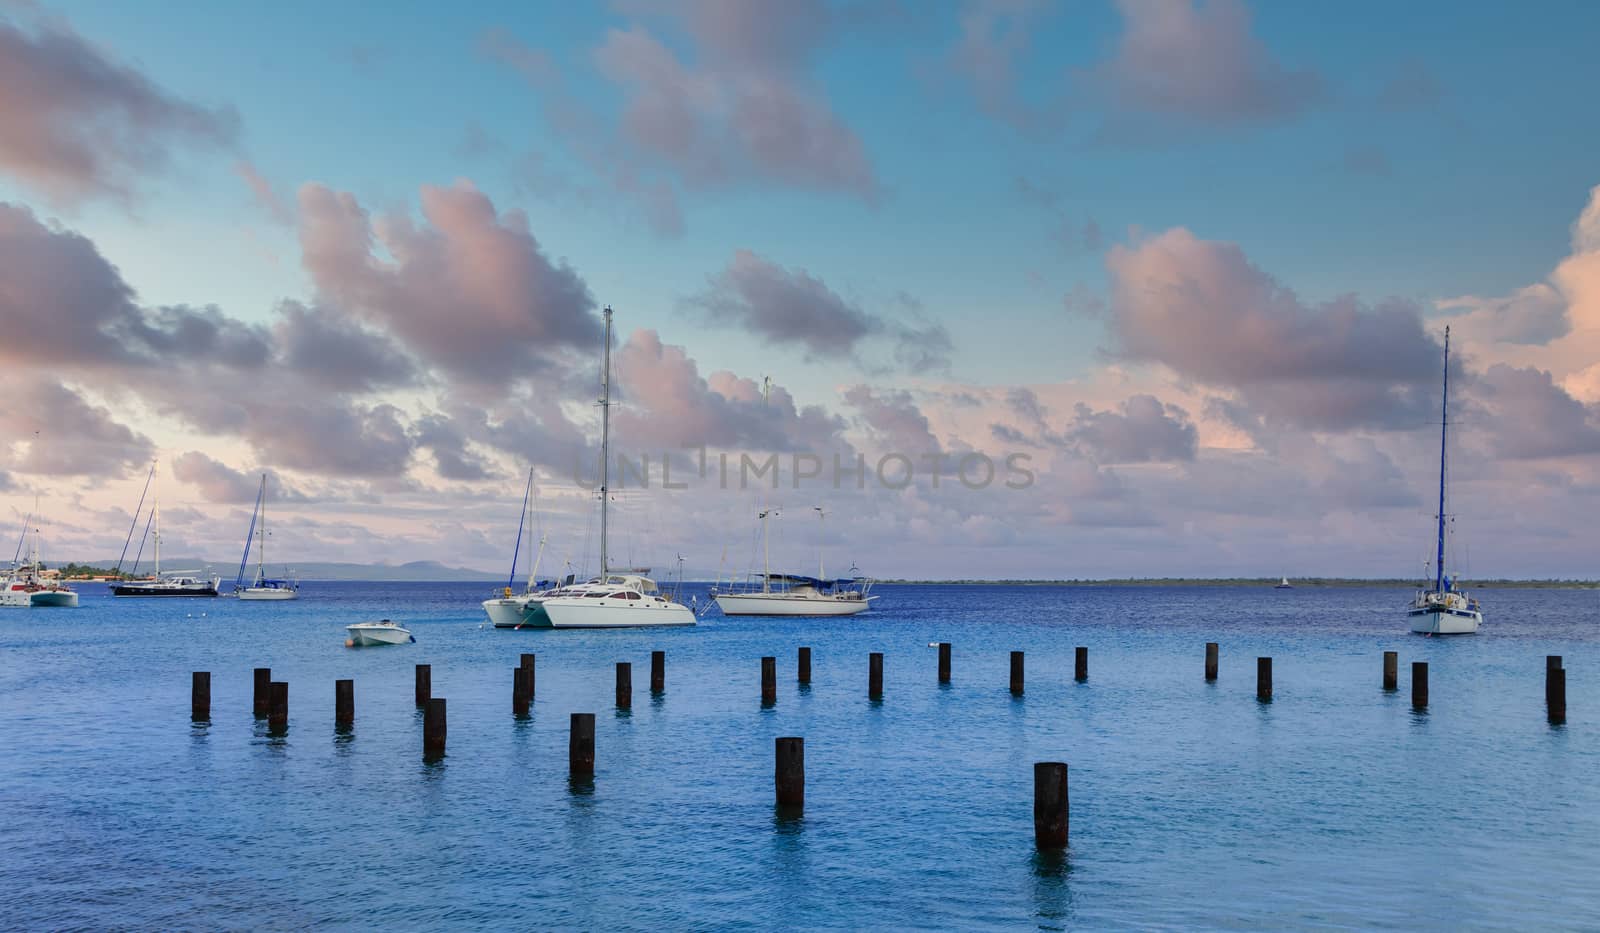 Sailboats Past Pilings in Bonaire by dbvirago